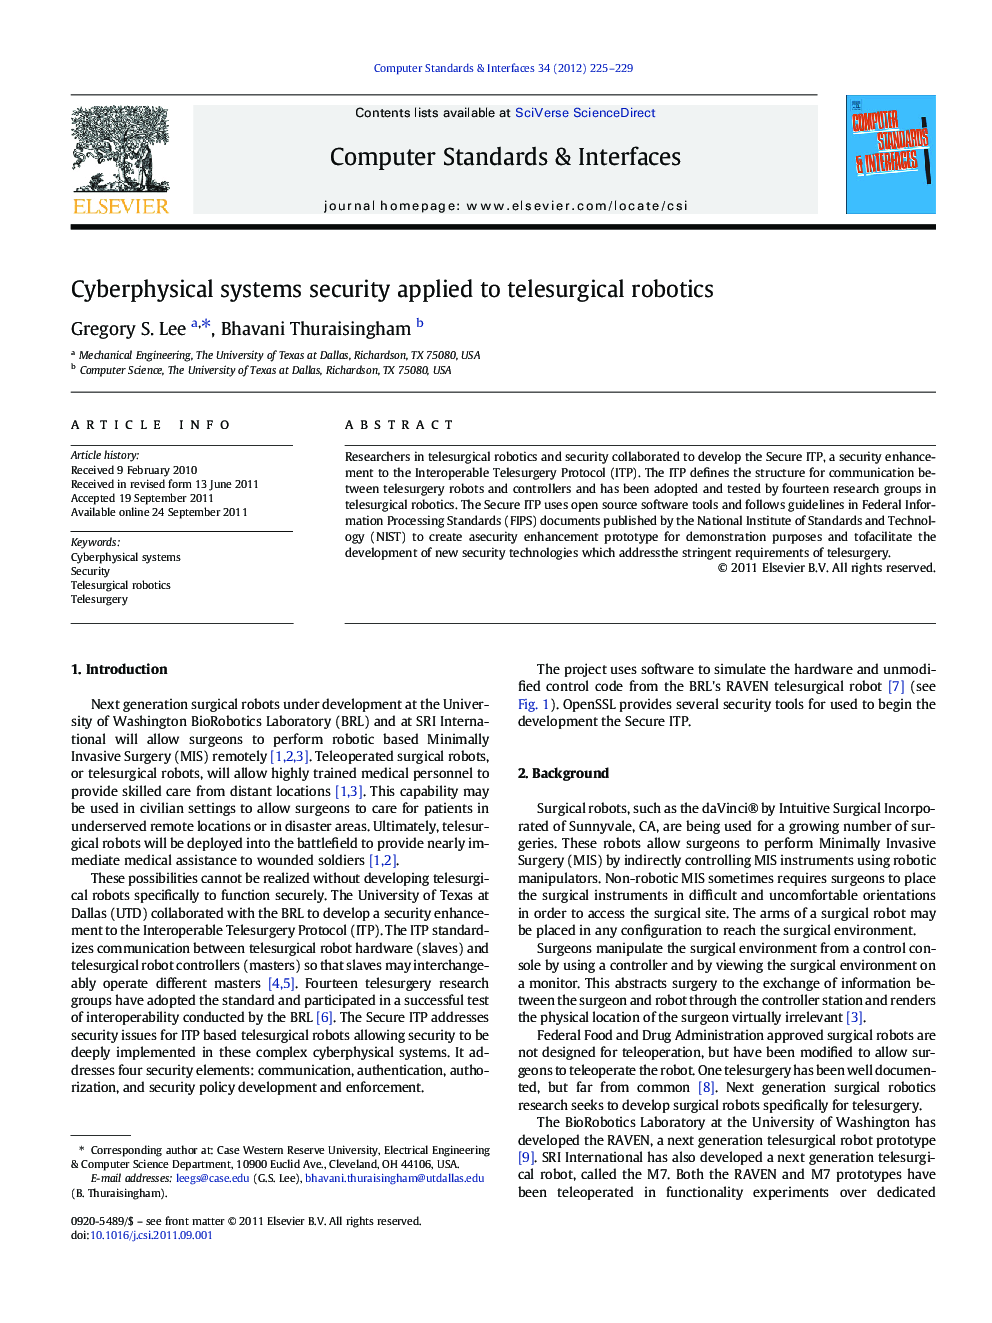 Cyberphysical systems security applied to telesurgical robotics